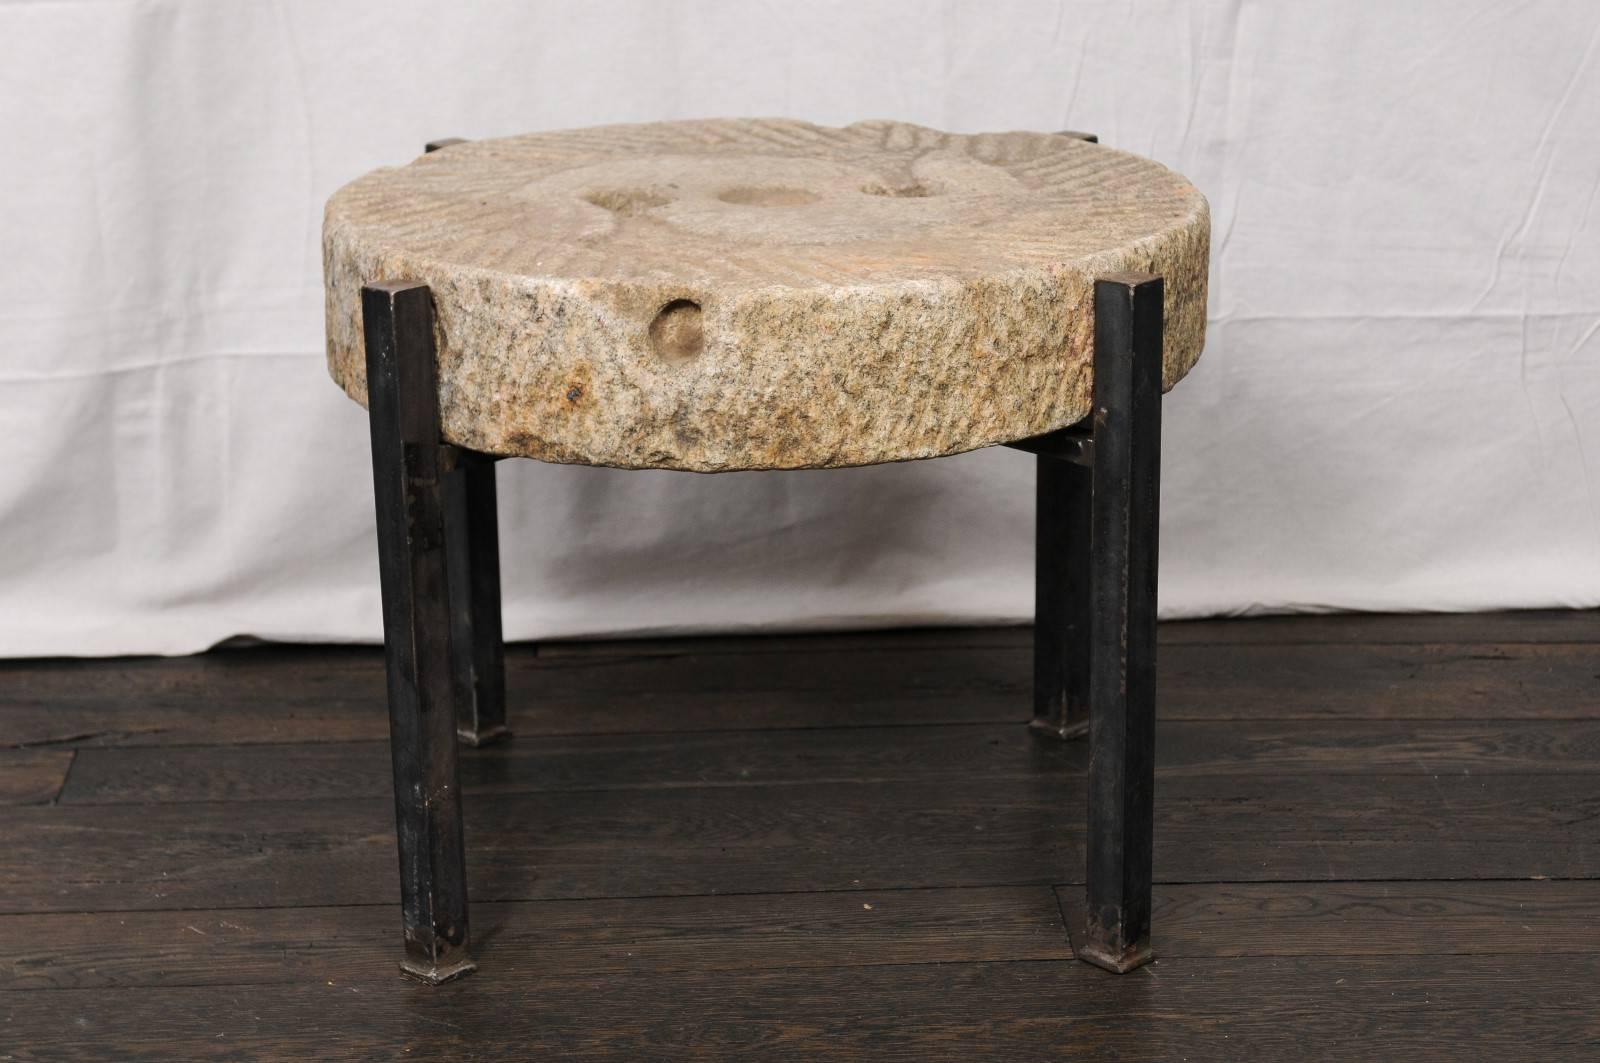 Rustic 19th Century European Millstone Grinding Surface Made Drink Table on Iron Base